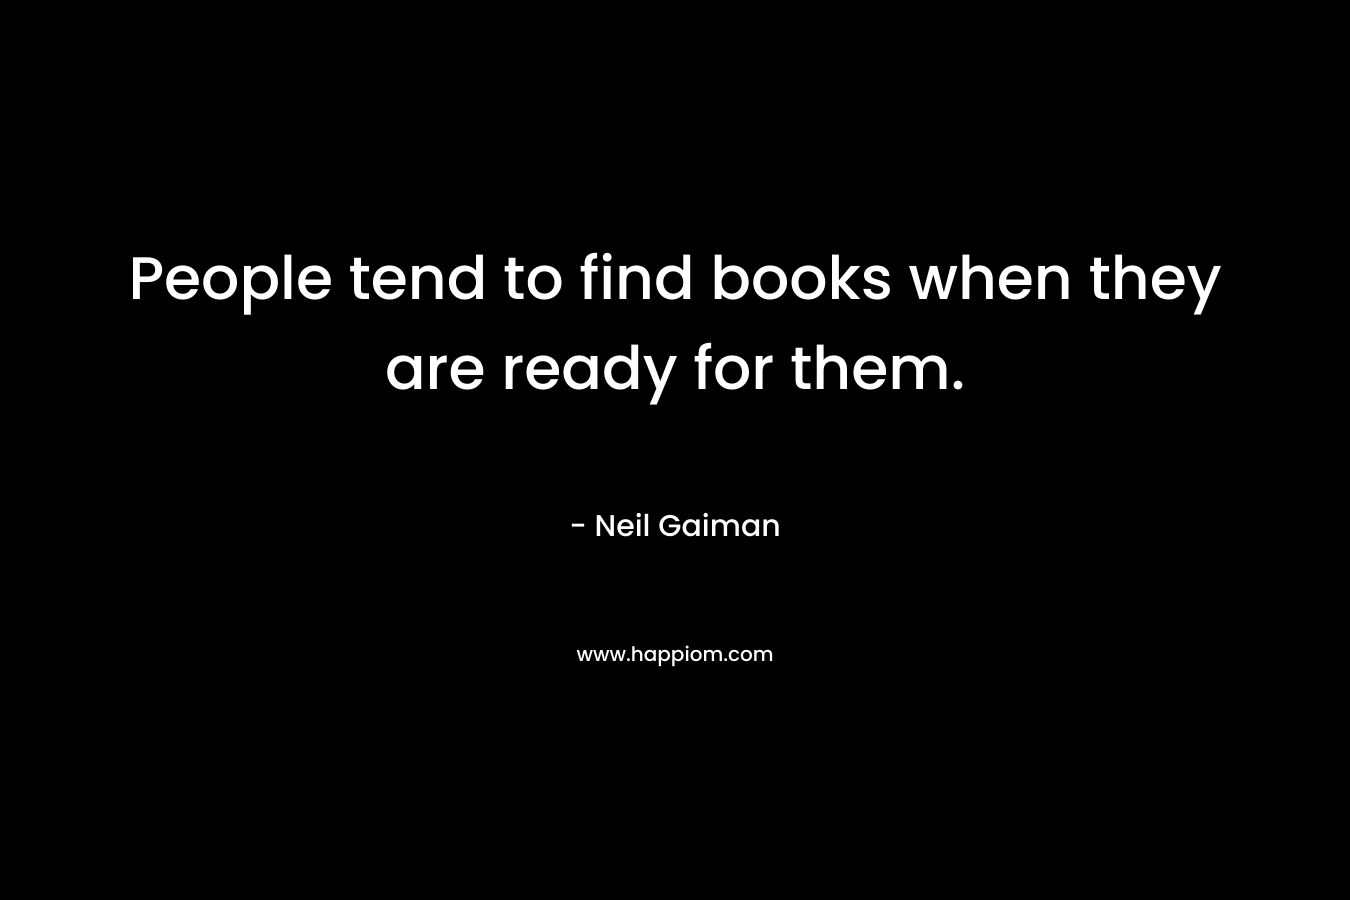 People tend to find books when they are ready for them. – Neil Gaiman